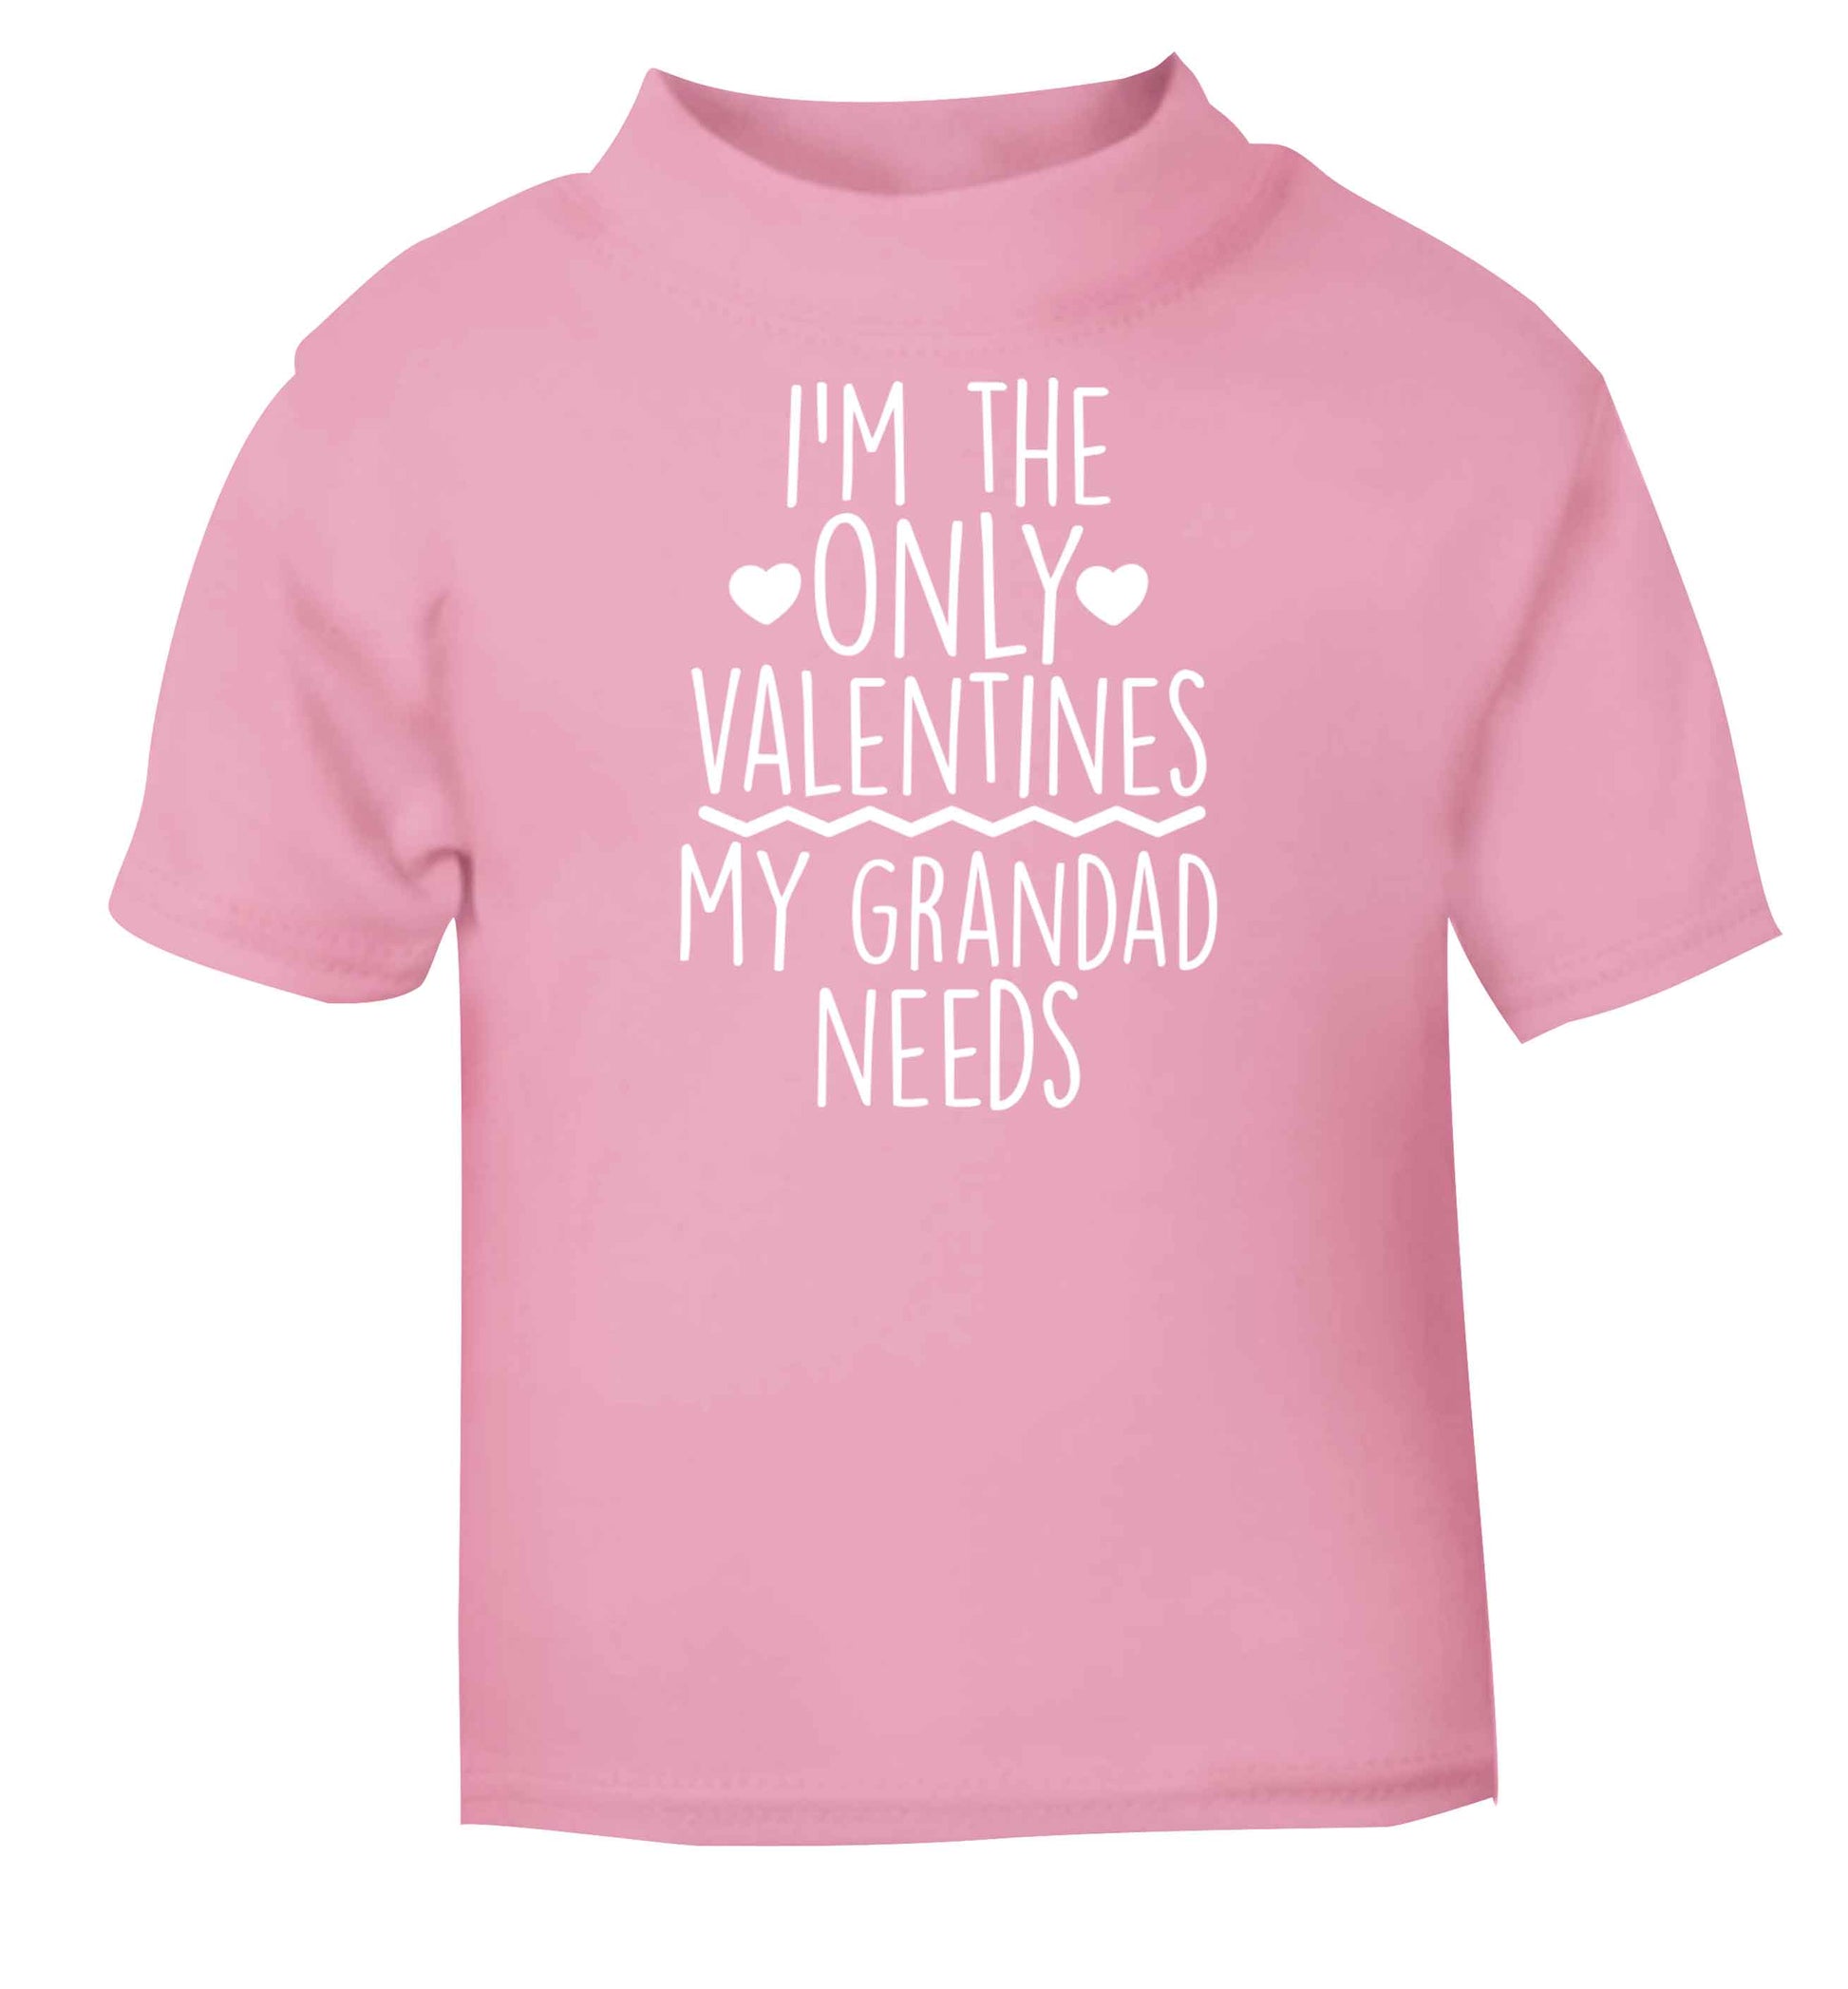 I'm the only valentines my grandad needs light pink baby toddler Tshirt 2 Years